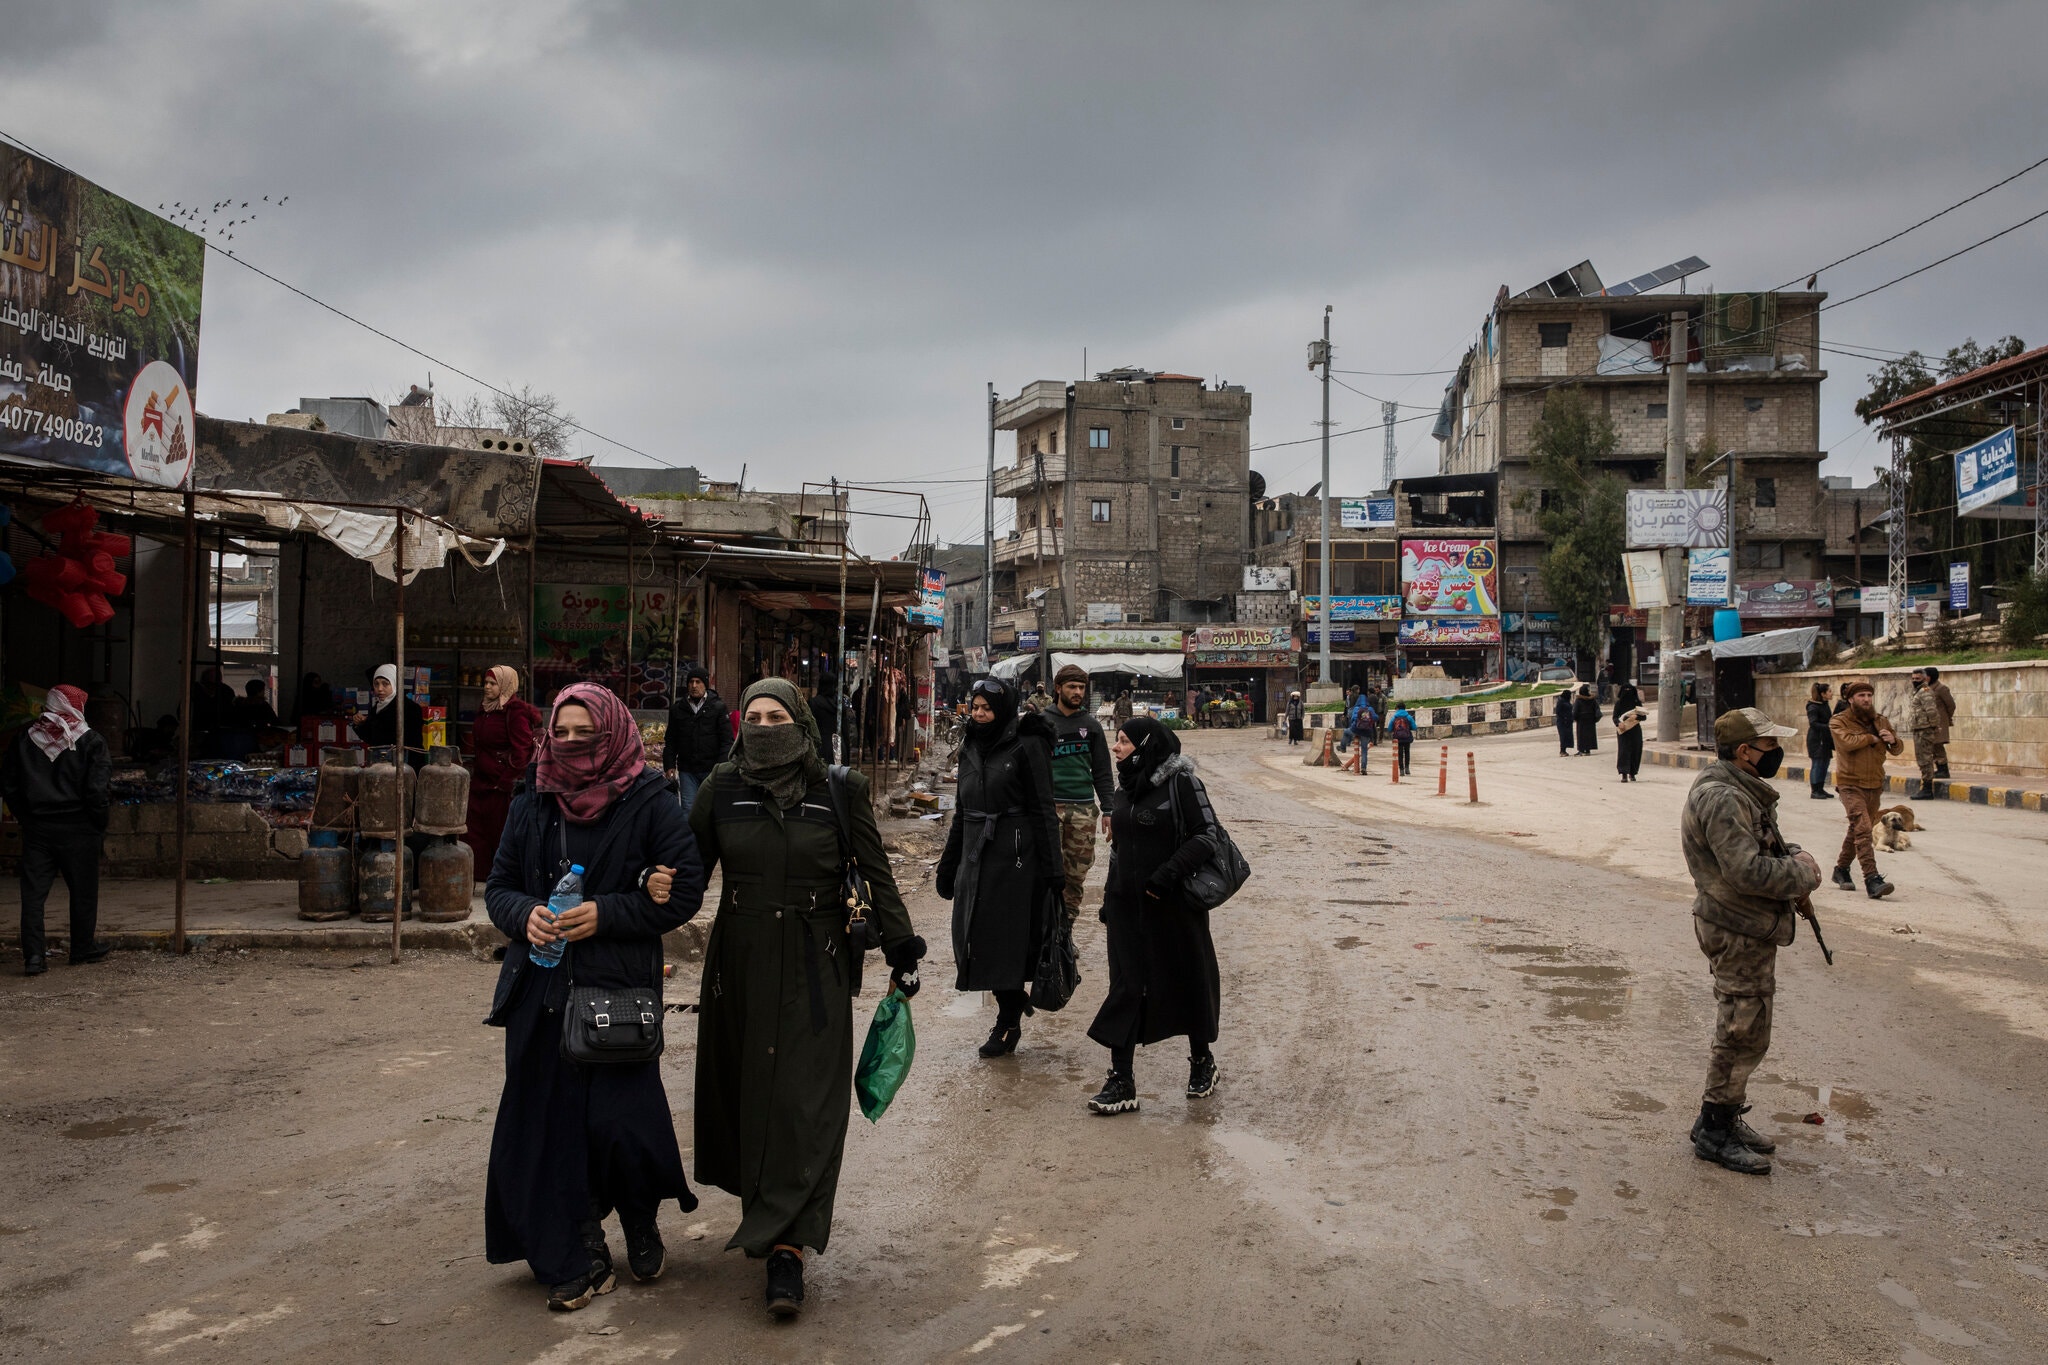 An Open Letter to the New Yor Times:  Occupied Afrin and the Lost Truth